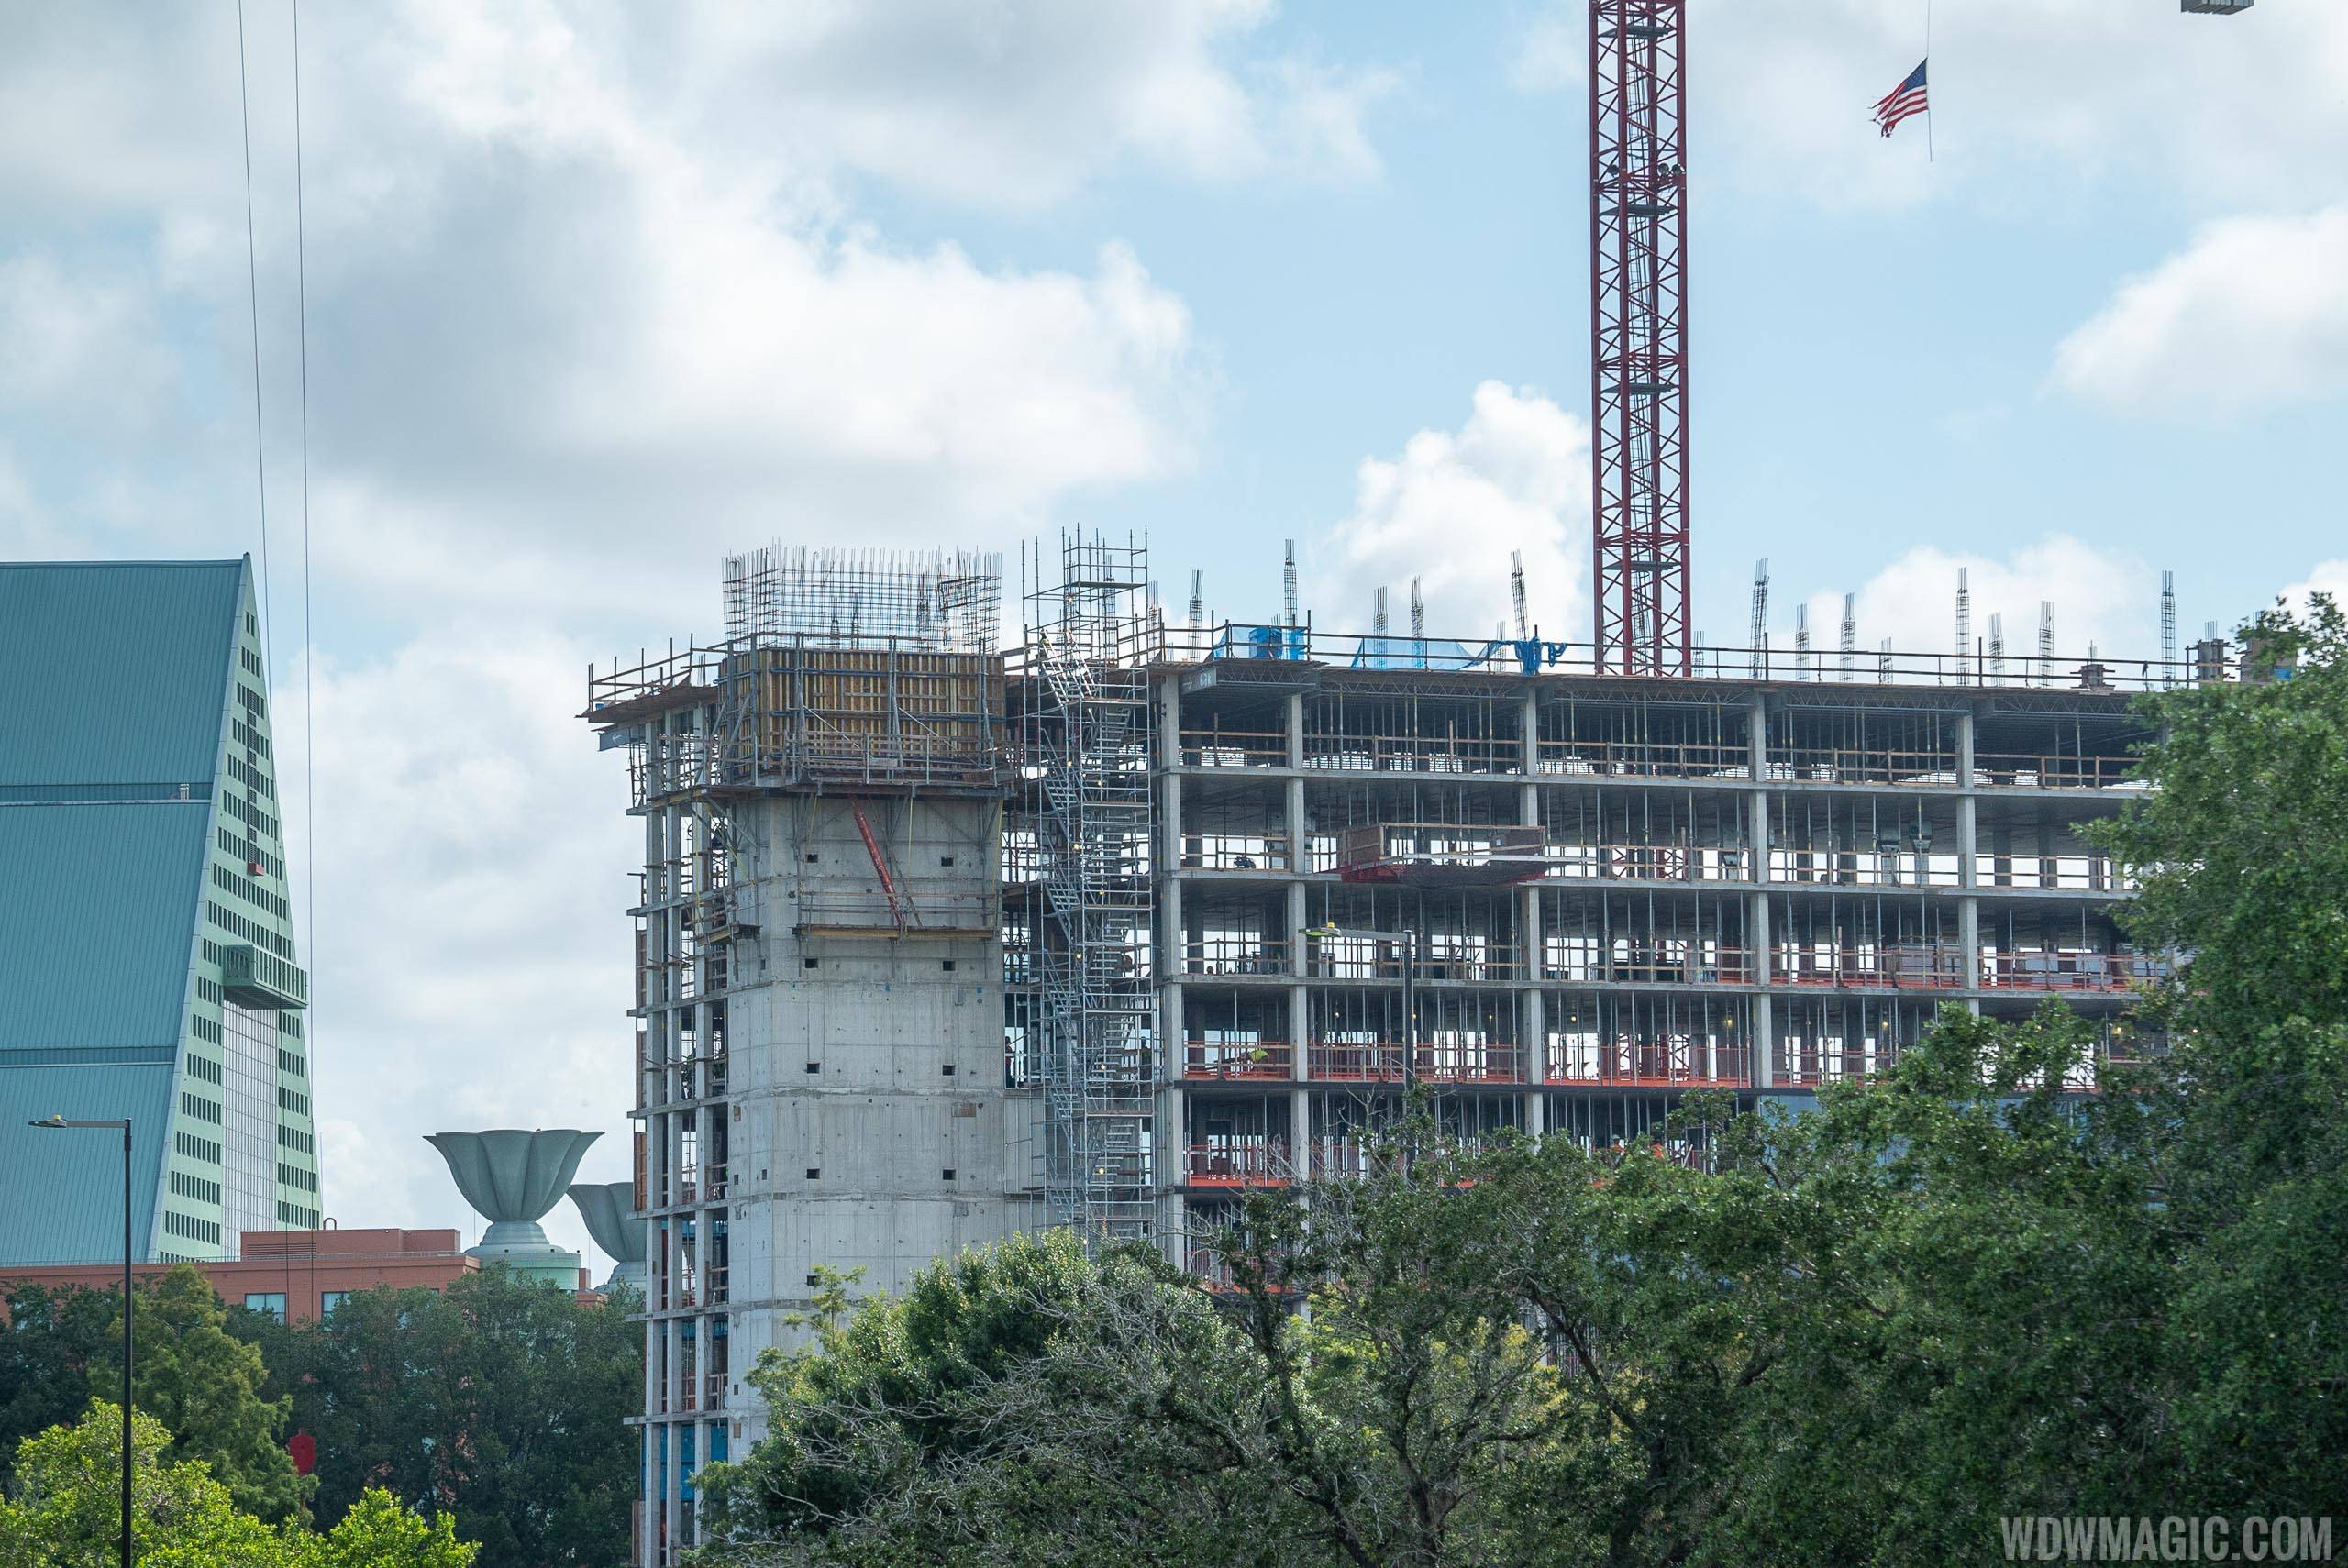 The Cove construction at the Walt Disney World Swan and Dolphin - June 2020